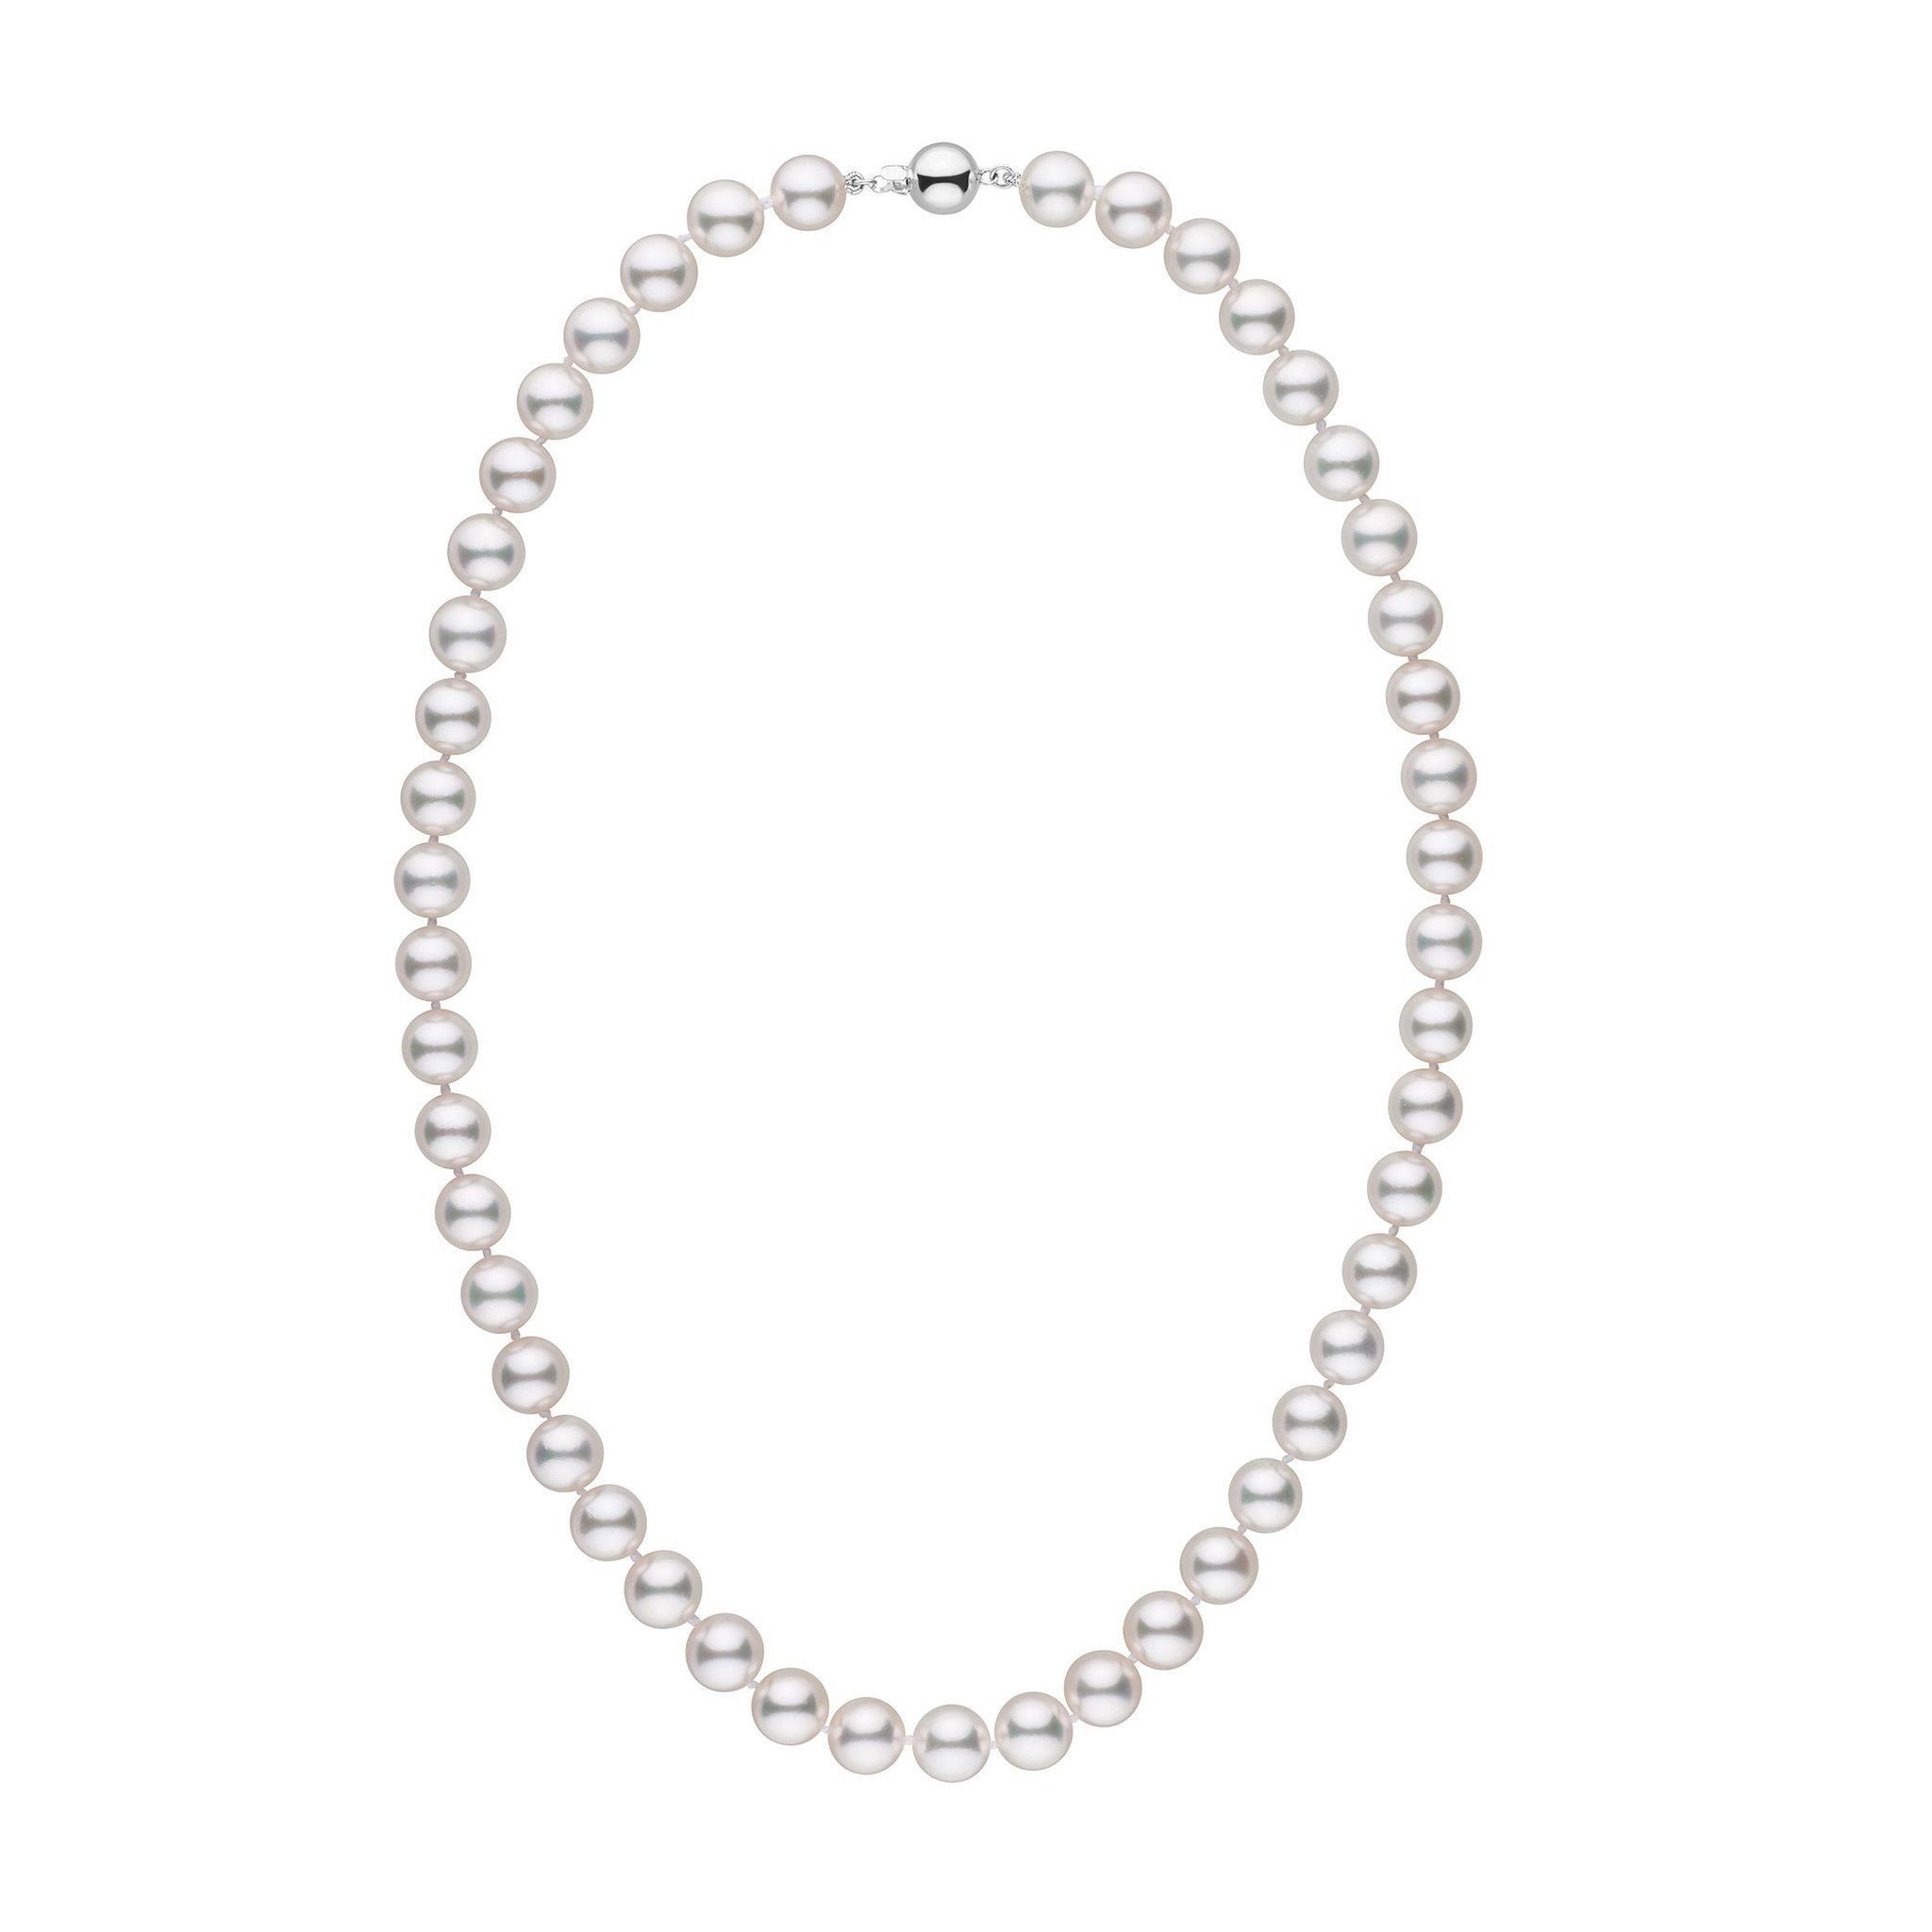 8.5-9.0 mm 18 inch AAA White Akoya Pearl Necklace White gold